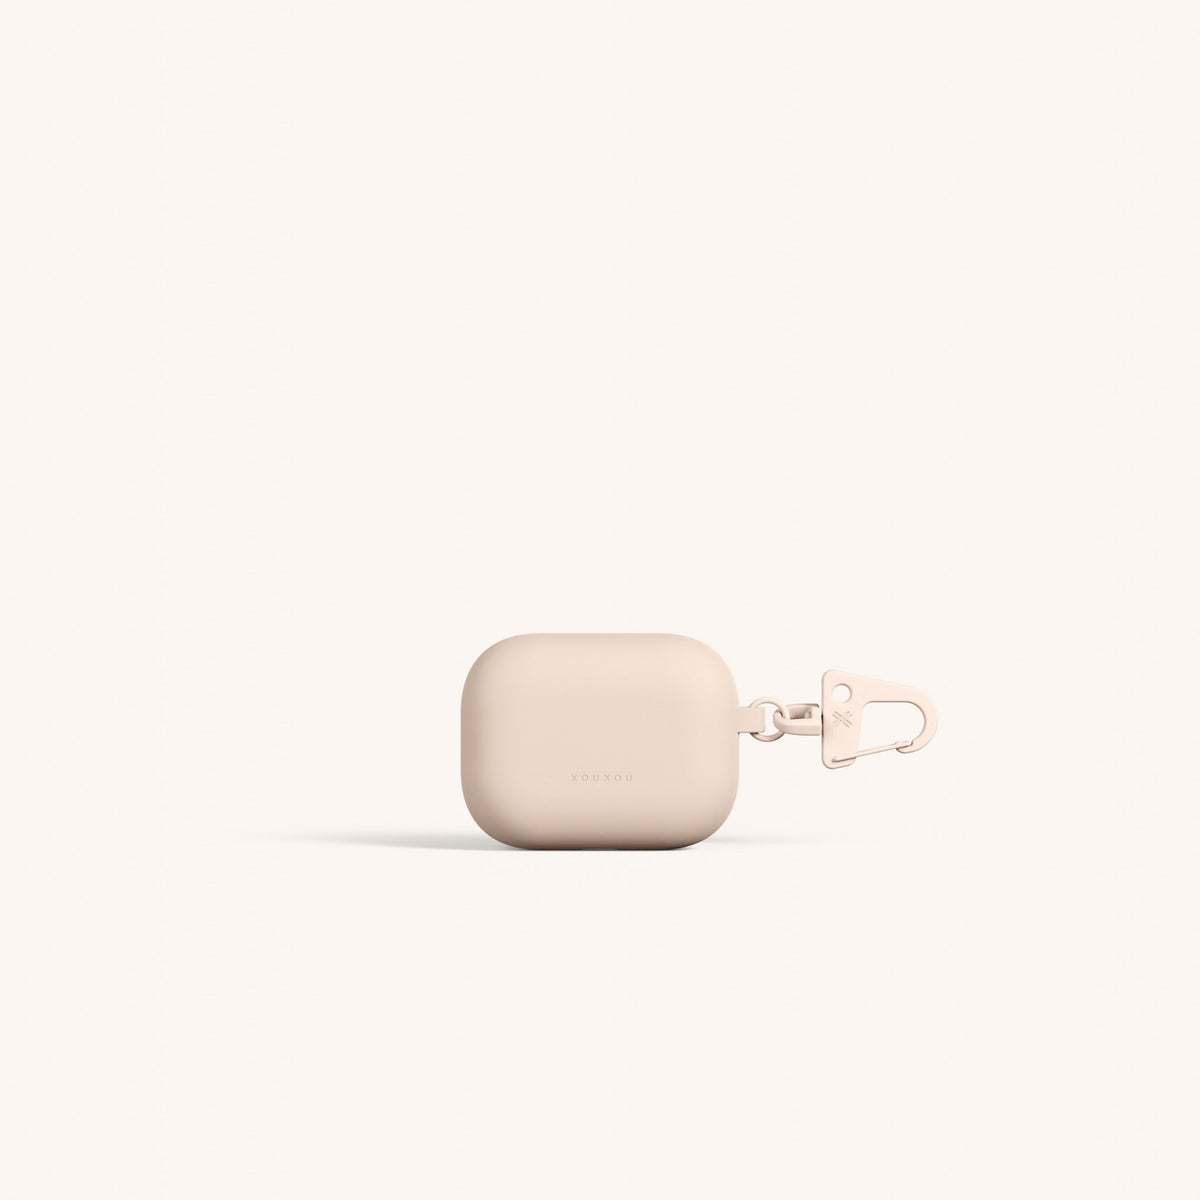 AirPods Case for AirPods Pro 1st Generation (2nd Generation compatible) in Powder Pink Total View | XOUXOU #airpods model_pro 1st gen (2nd gen comp.)